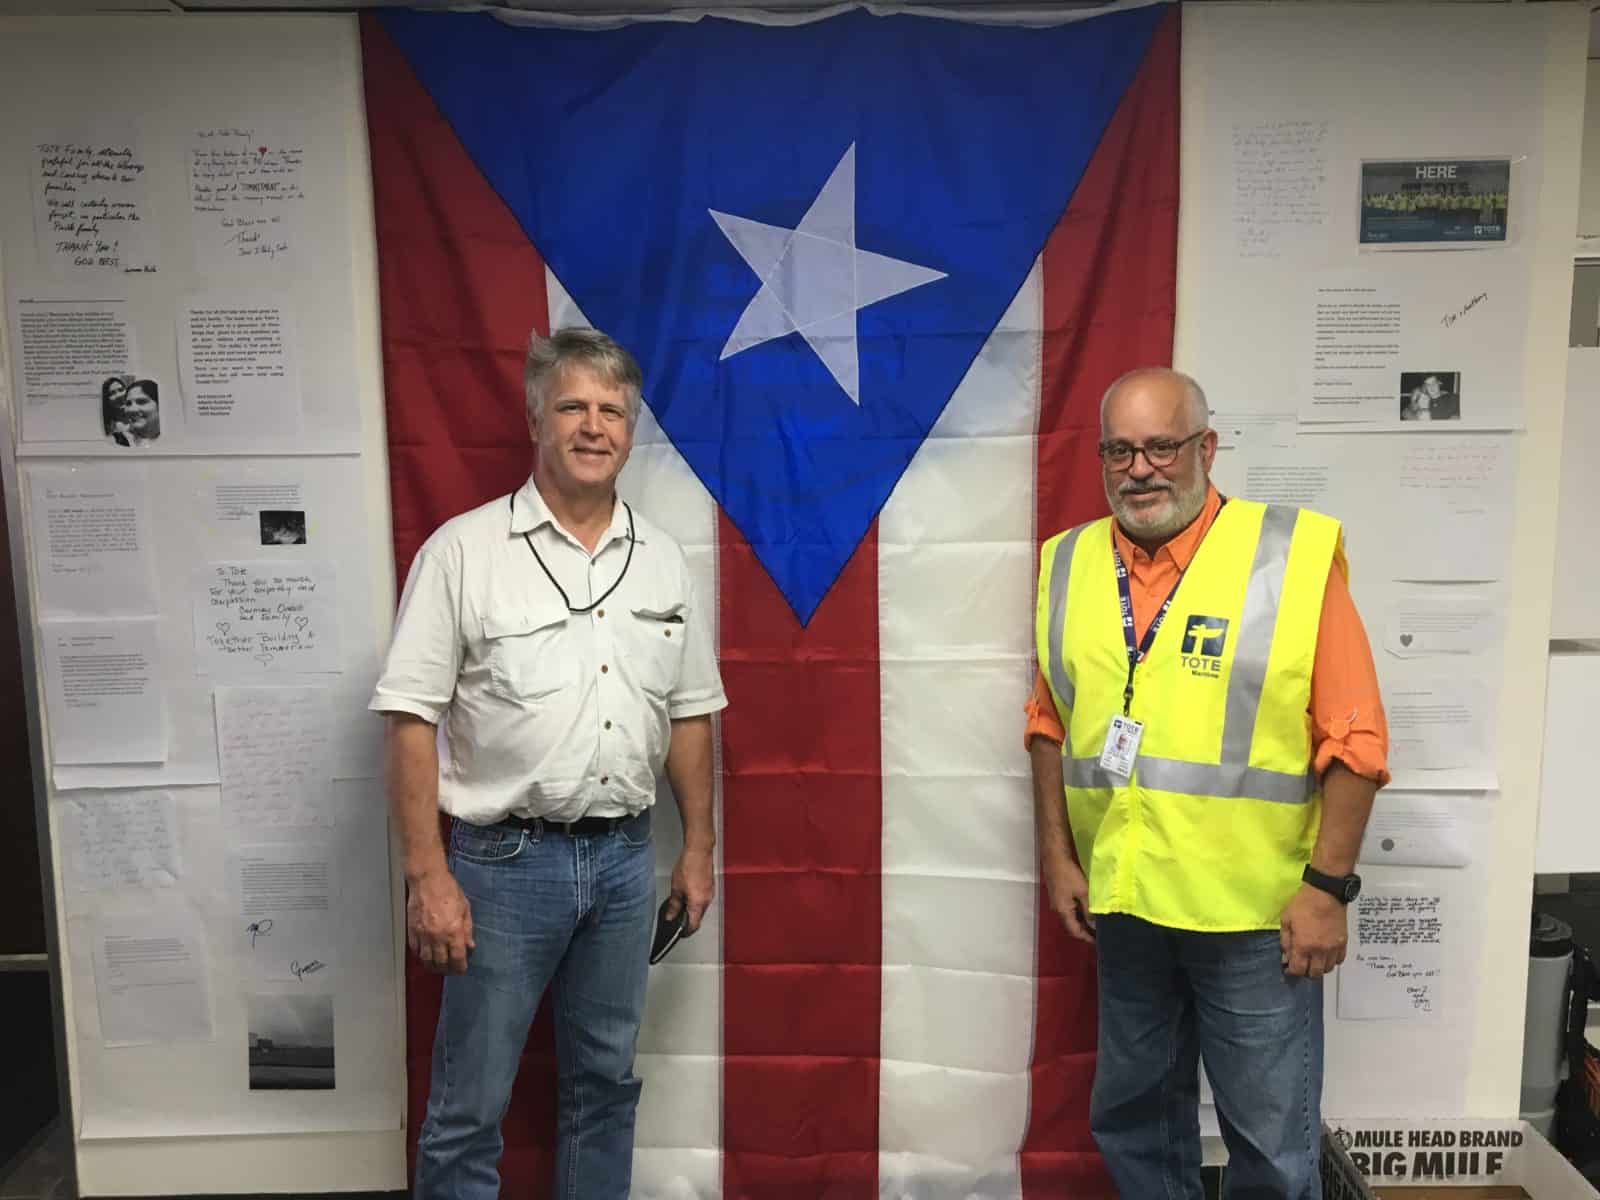 Wagoner poses in front of a Puerto Rican flag with TOTE VP.